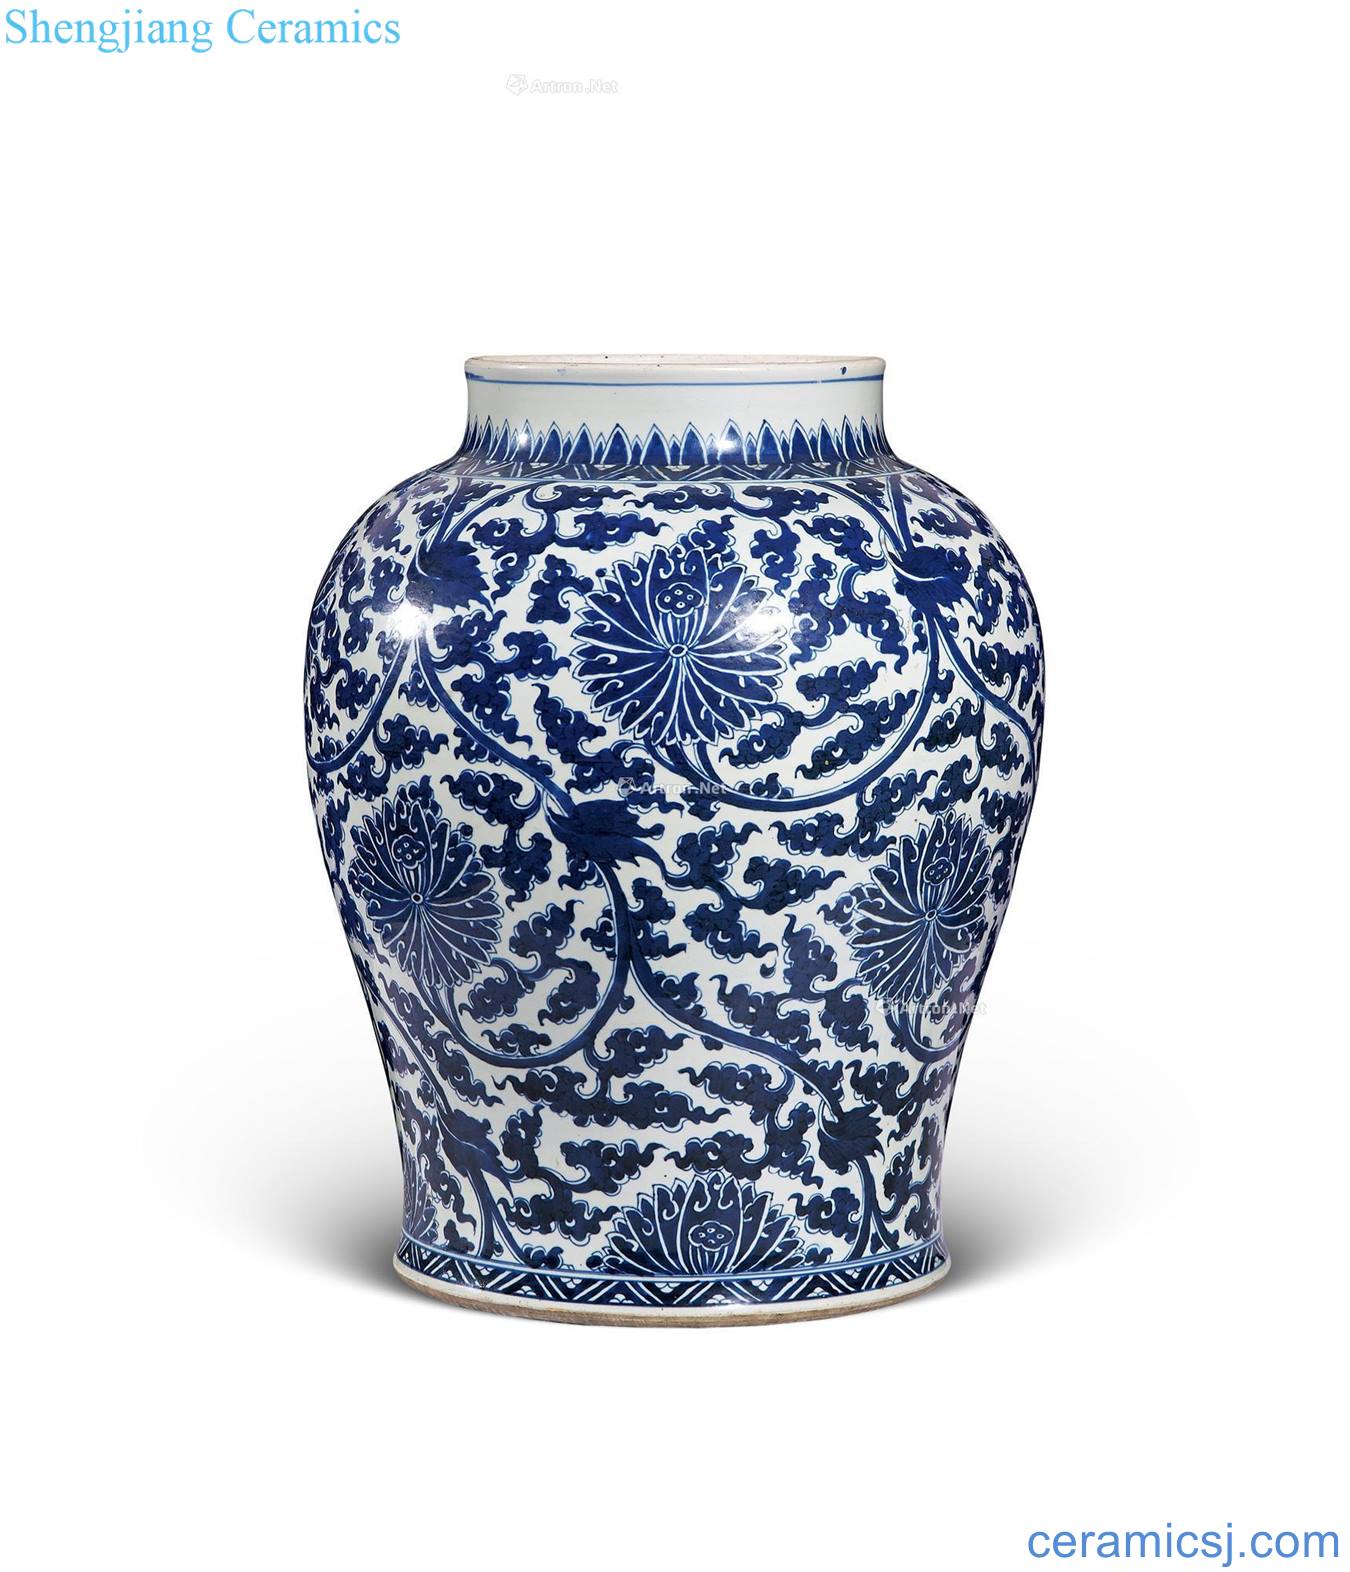 In the early qing Blue and white lotus flower general grain tank